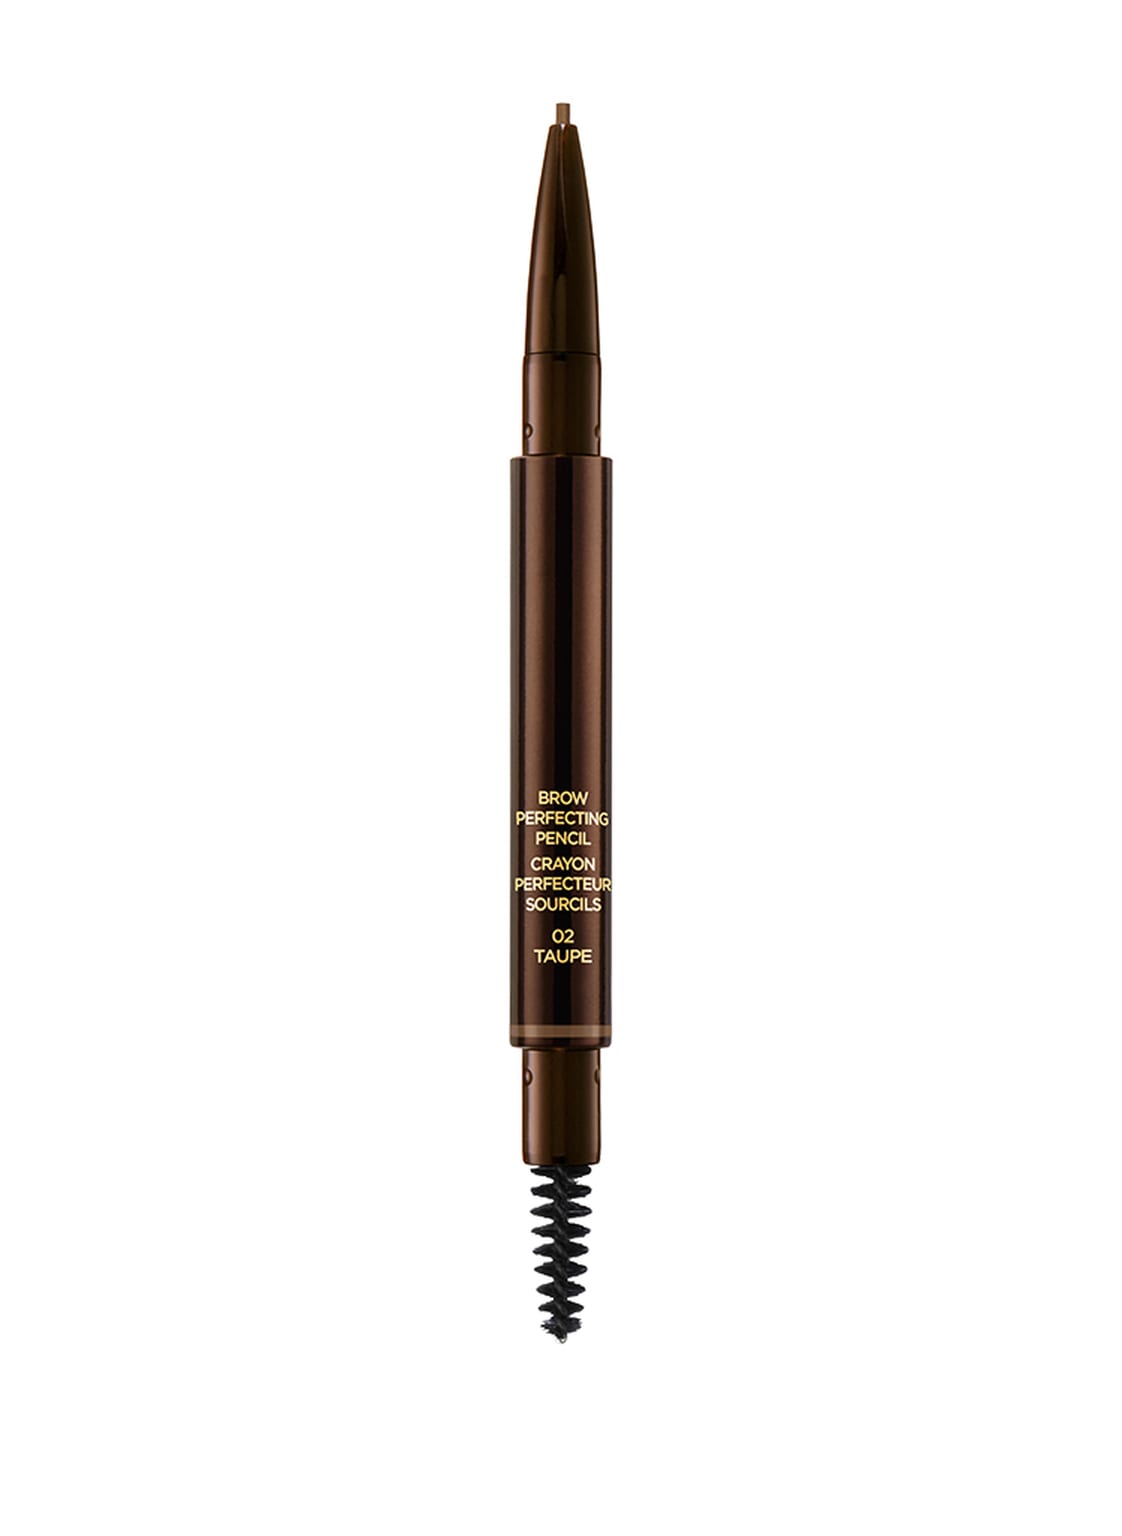 Image of Tom Ford Beauty Brow Perfecting Pencil Augenbrauenstift